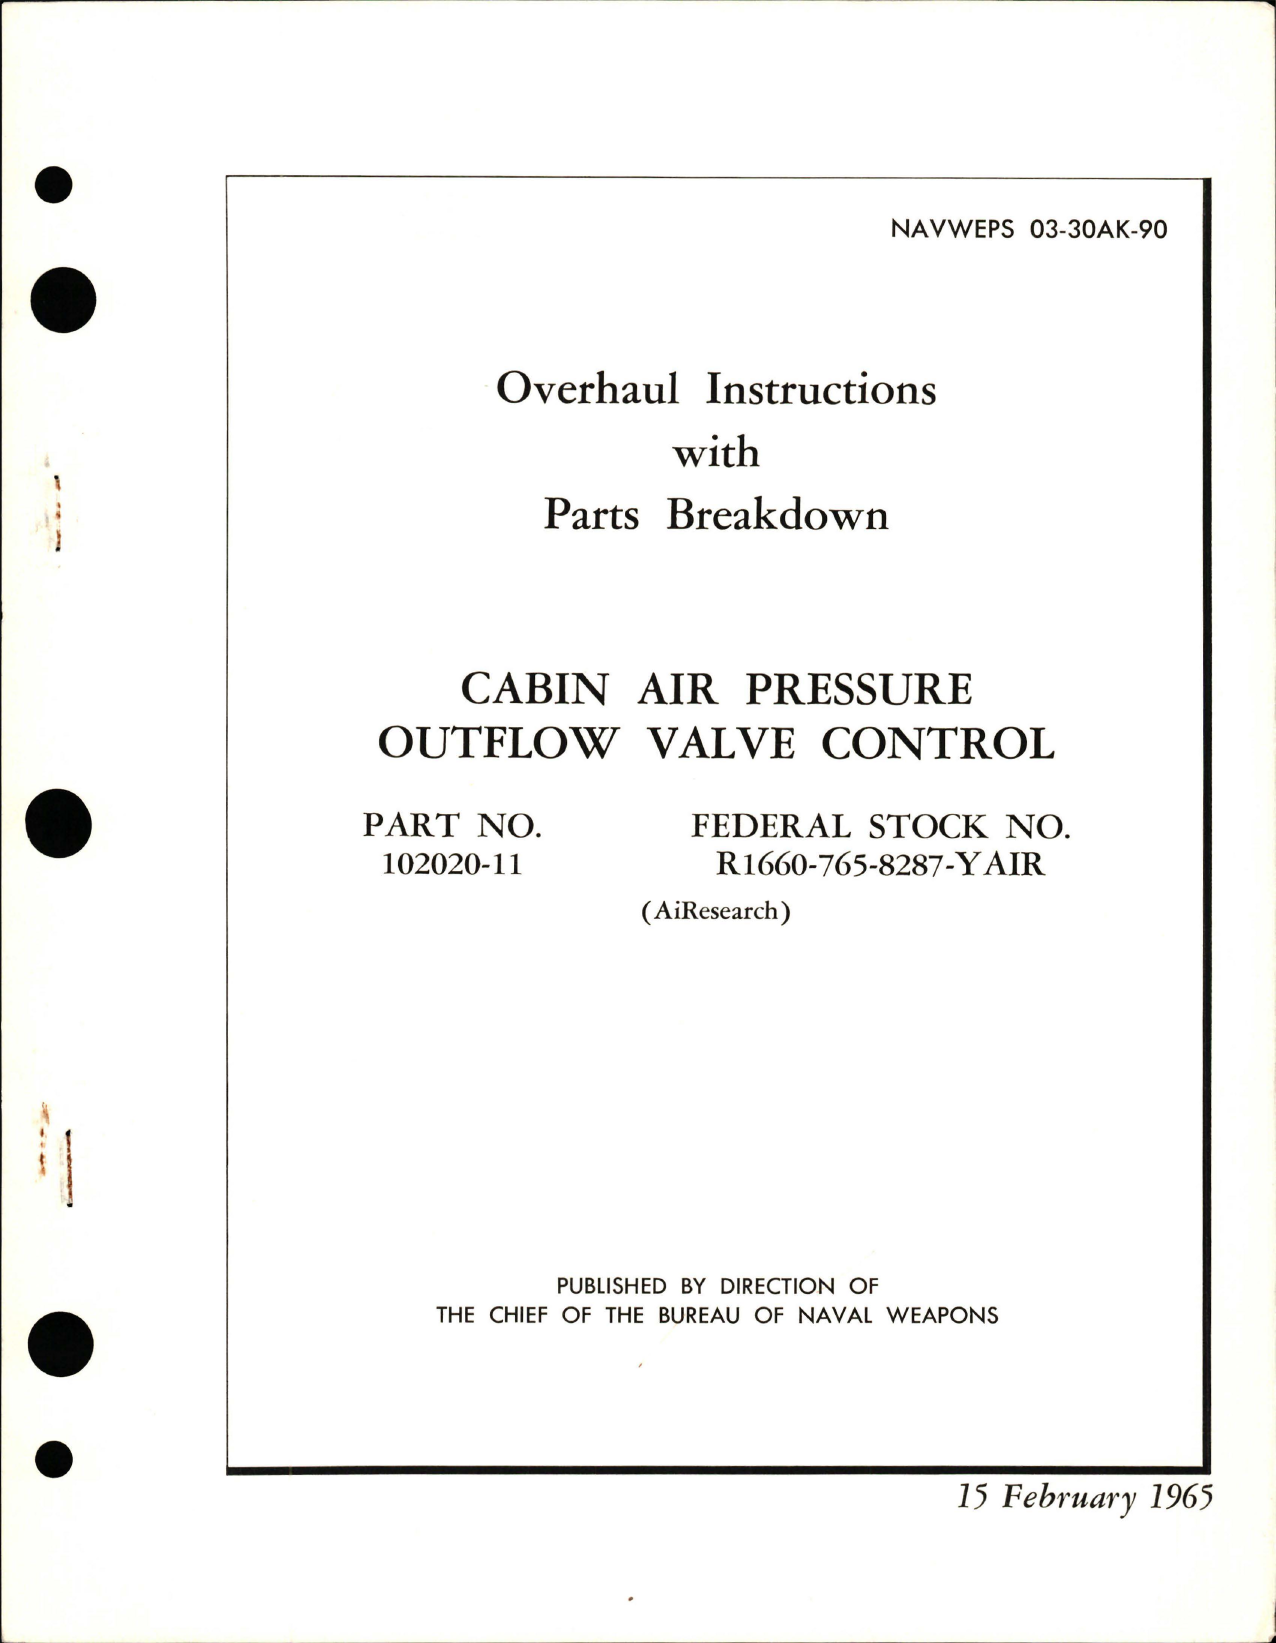 Sample page 1 from AirCorps Library document: Overhaul Instructions with Parts Breakdown for Cabin Air Pressure Outflow Valve Control - Part 102020-11